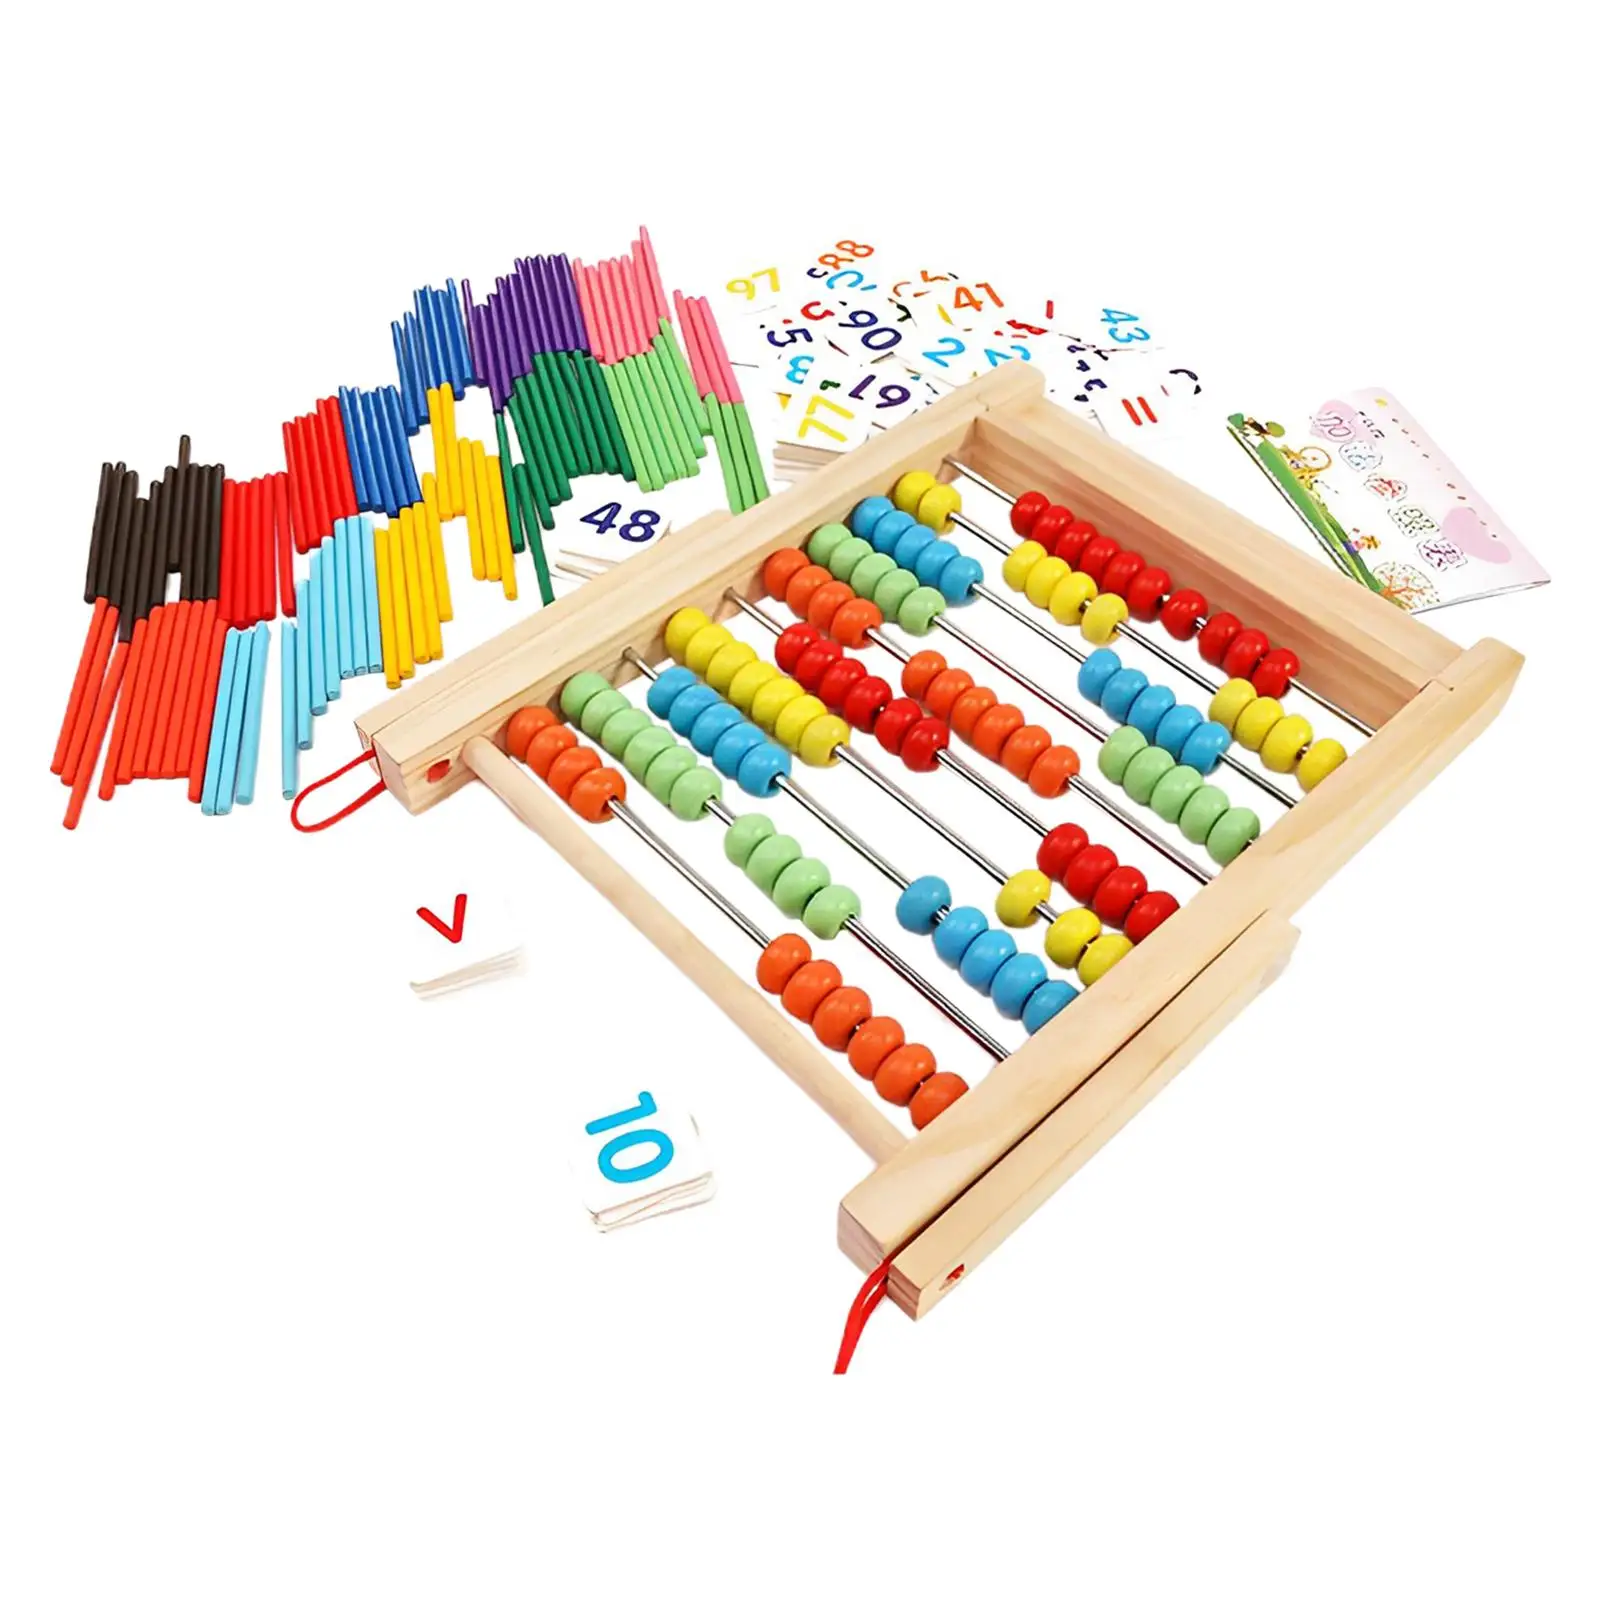 Wooden Abacus Counting Sticks with Multi Color Beads Educational Counting Toy for Toddlers Kids Preschool Kindergarten Children